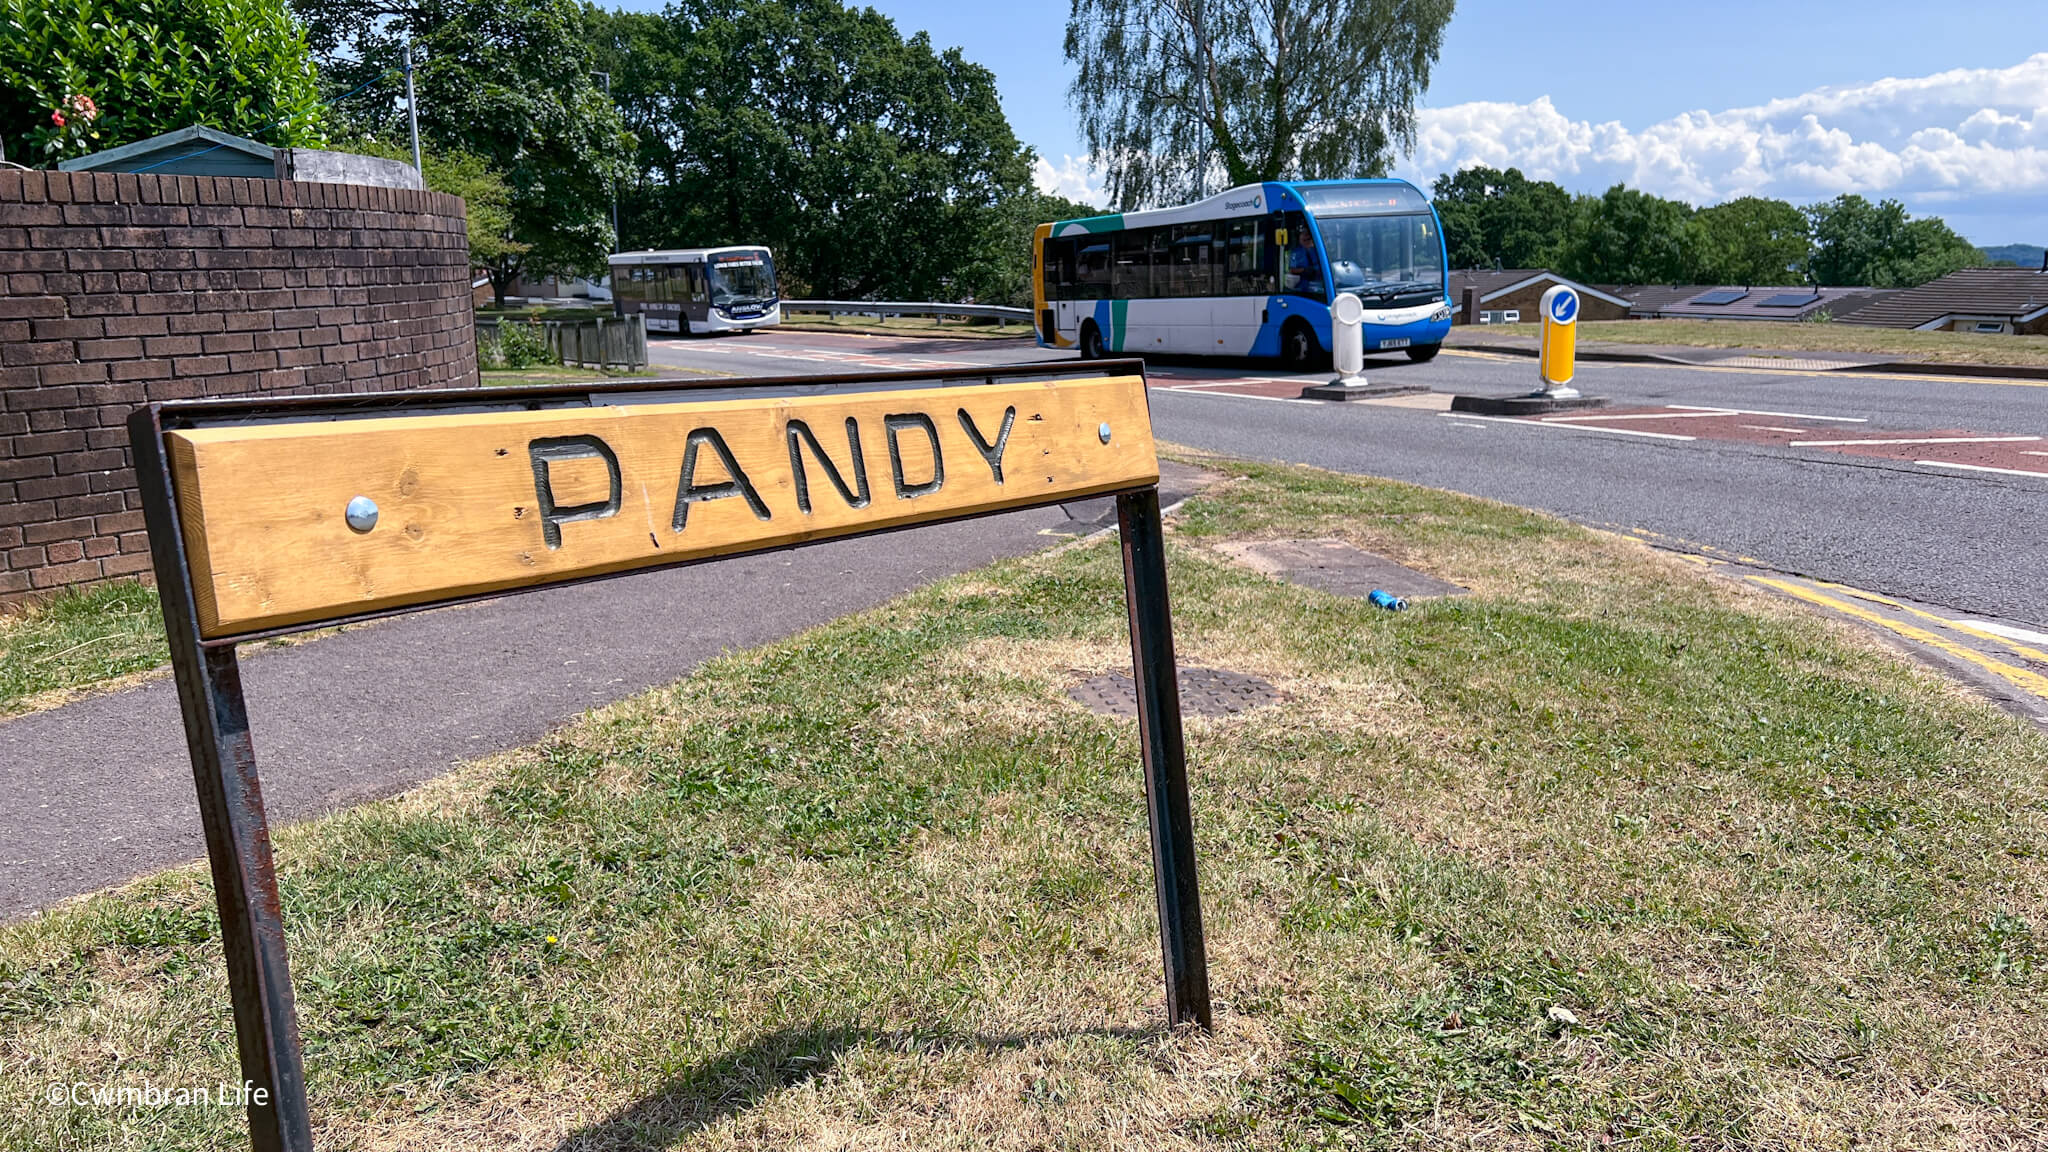 a street sign for Pandy, a street in Cwmbran